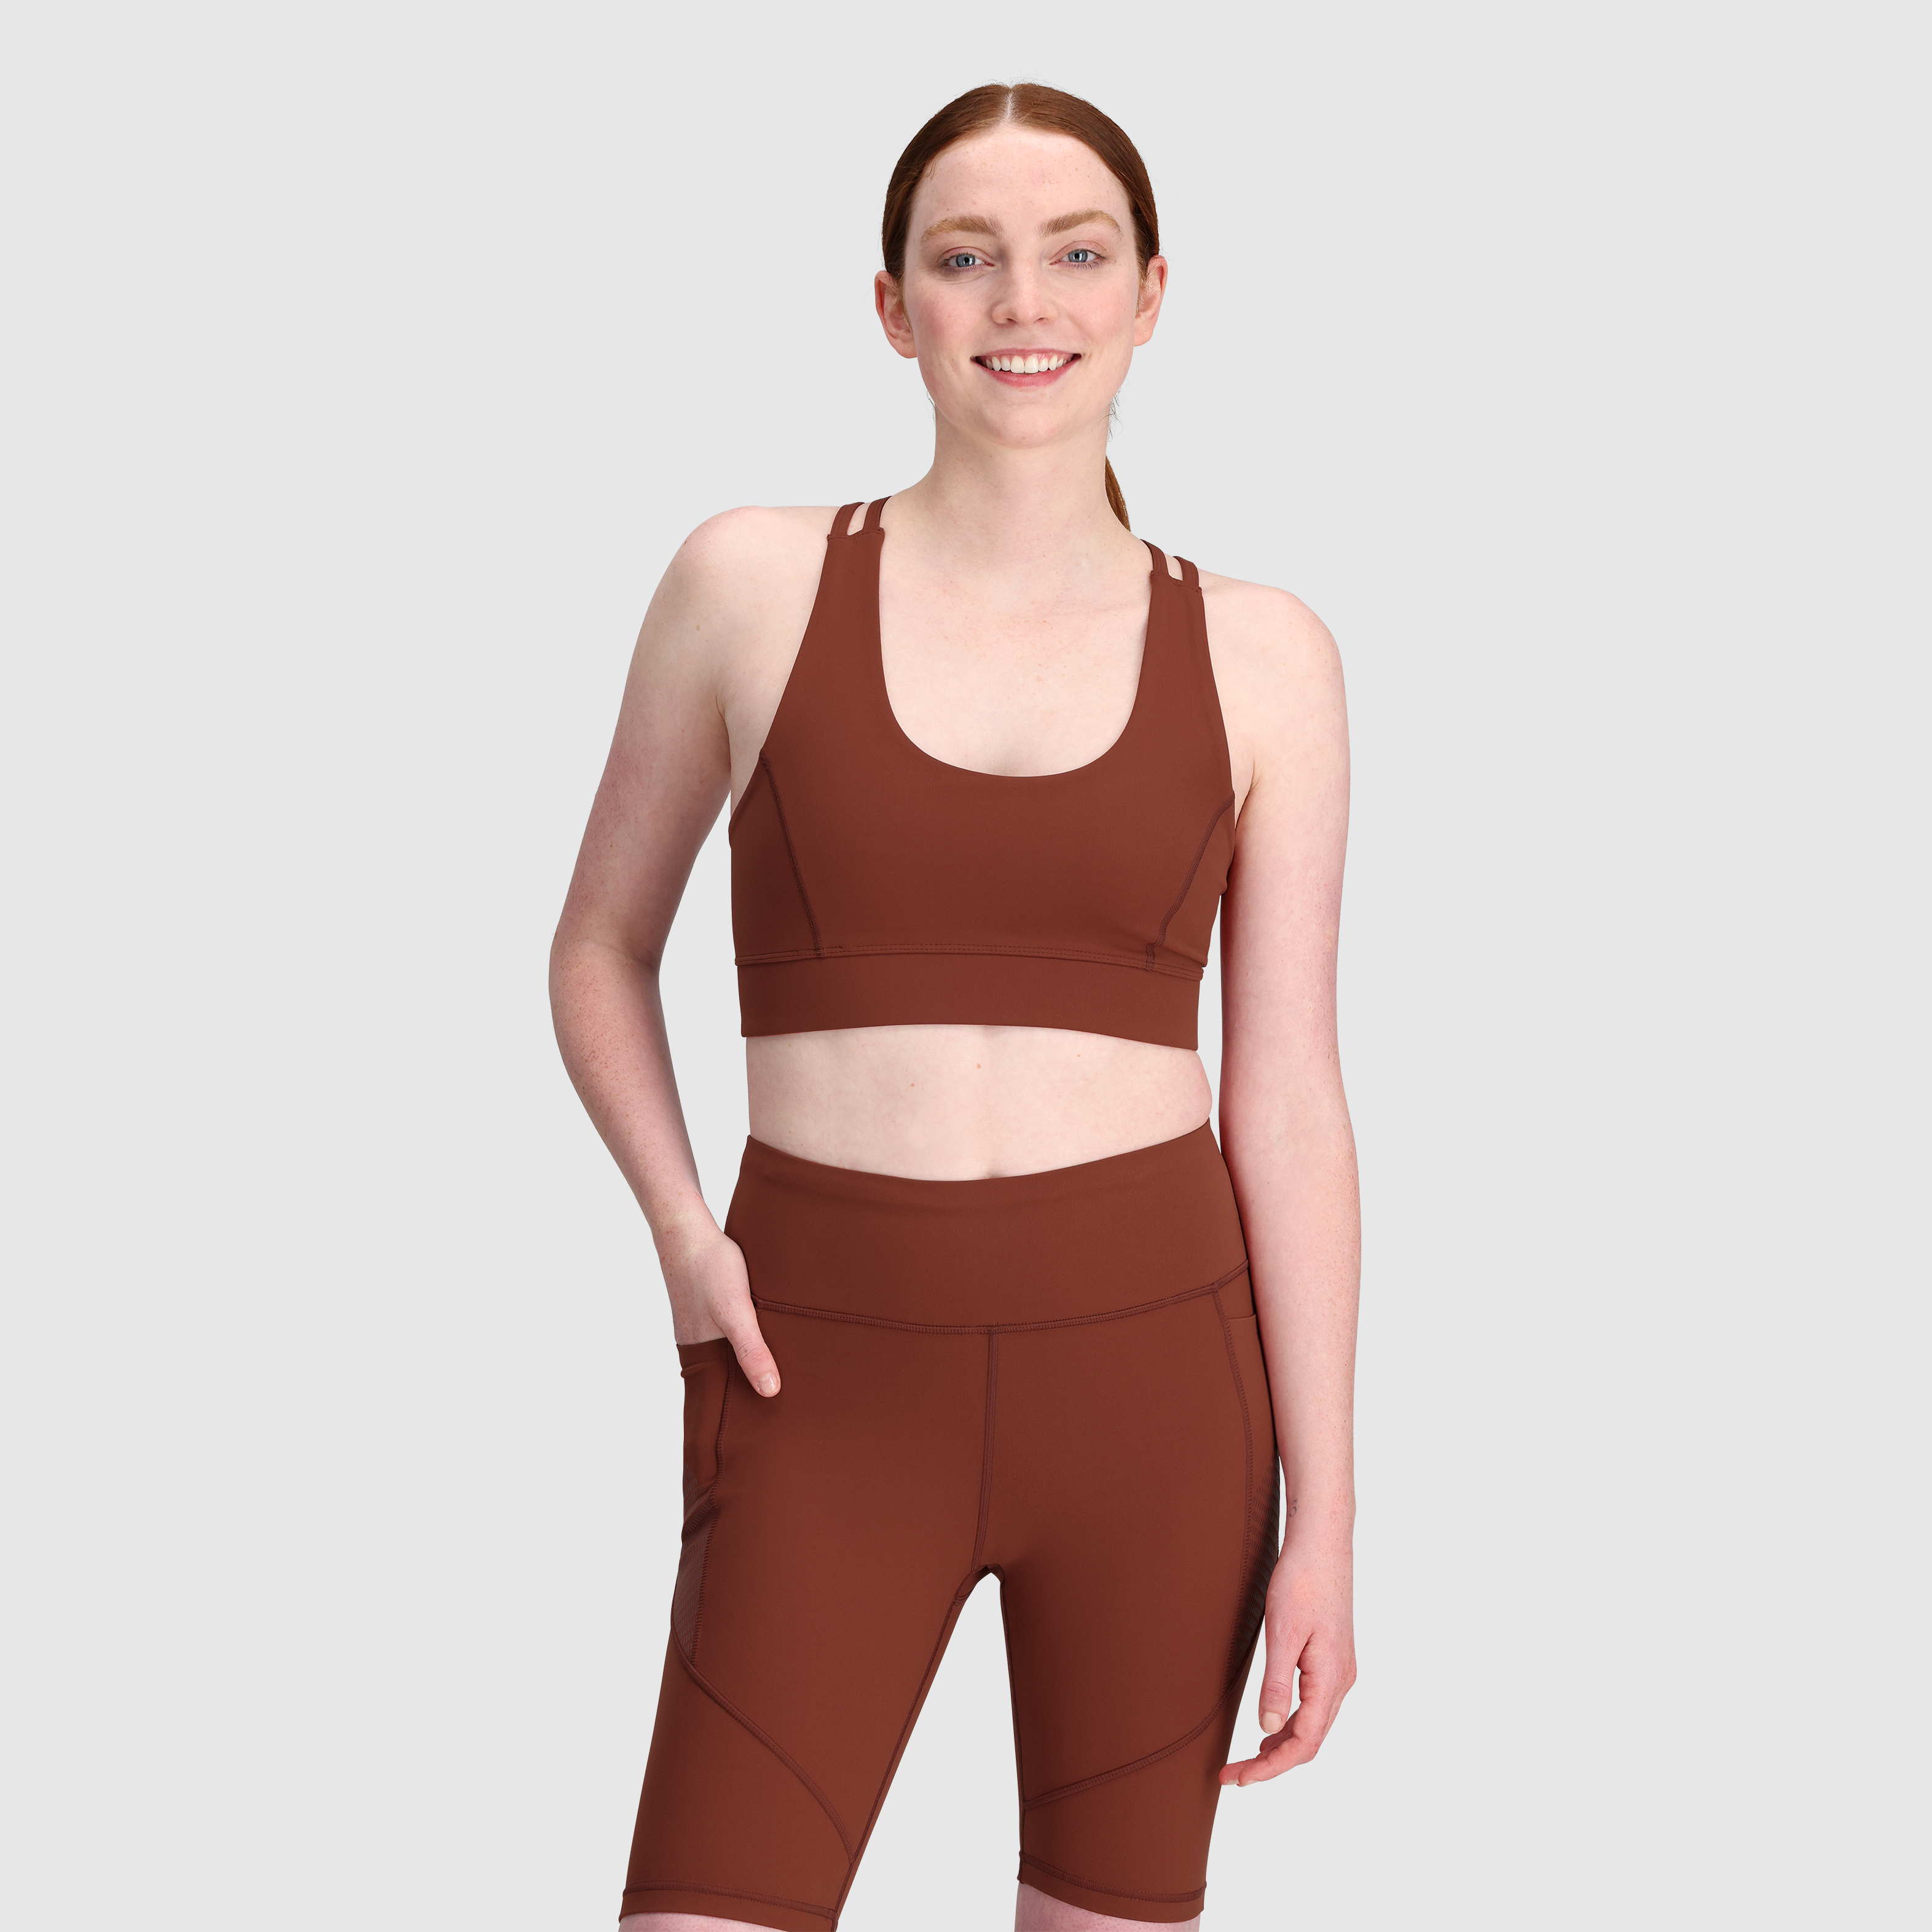 Best Sports Bras & Crop Tops for Women With Small Boobs  Checkout – Best  Deals, Expert Product Reviews & Buying Guides